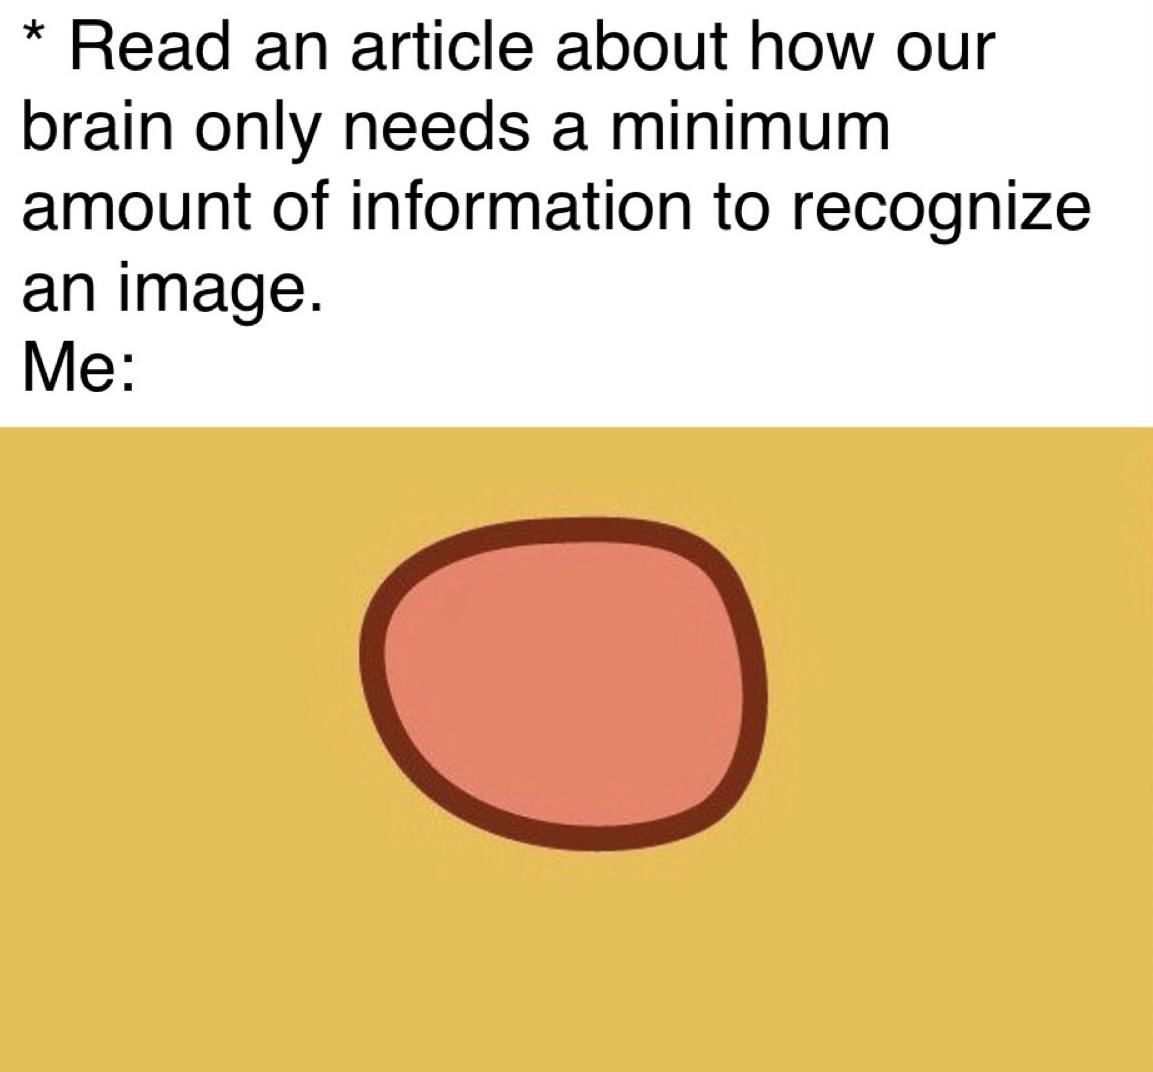 dank memes - read an article about how our brain only needs a minimum amount of information to recognize an image - Read an article about how our brain only needs a minimum amount of information to recognize an image. Me